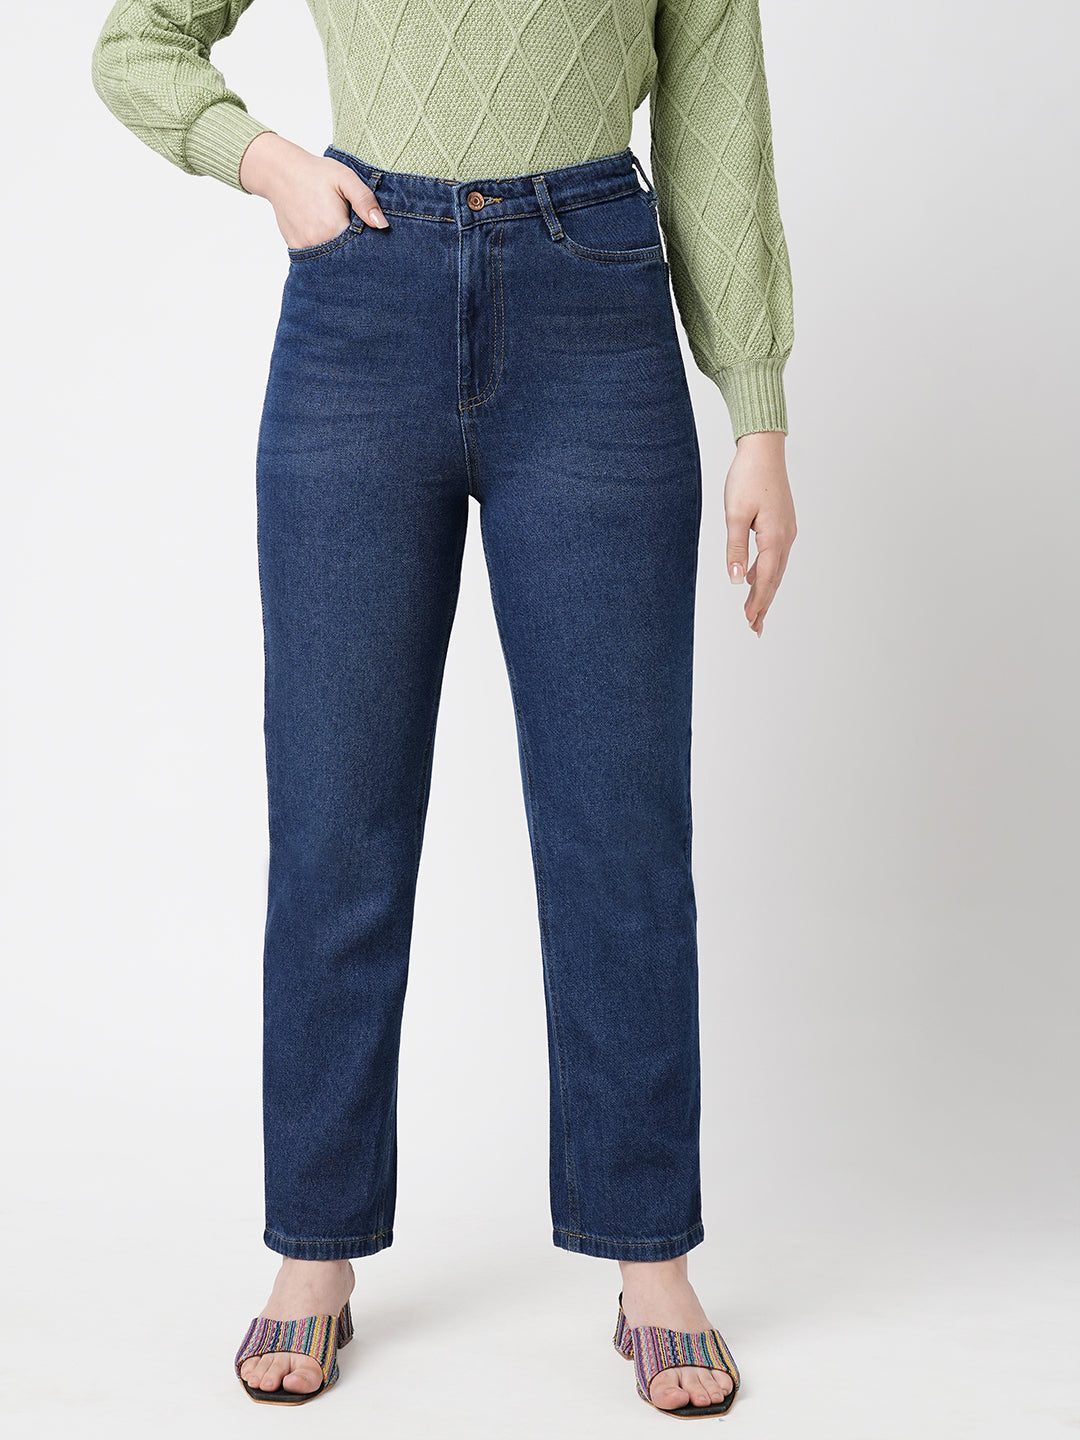 Buy KRAUS Mom Fit Ankle Length Cotton Womens Jeans